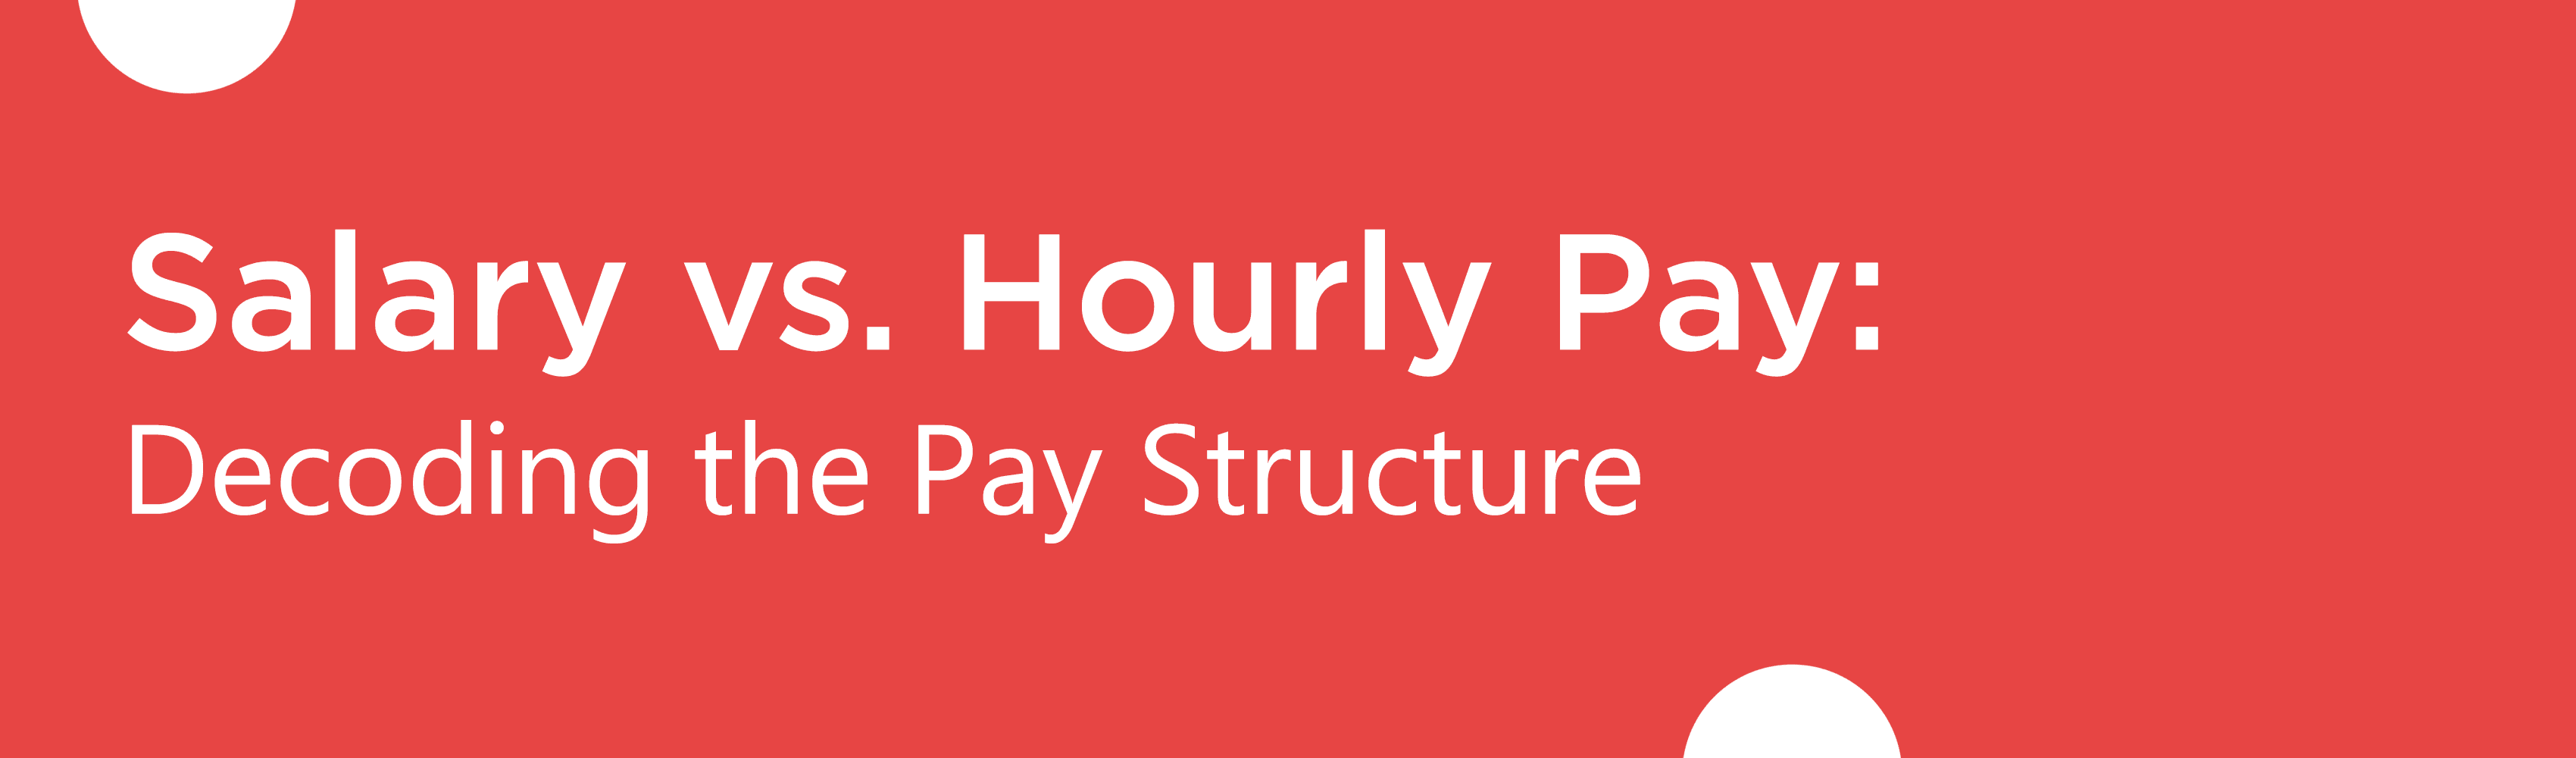 Salary vs. Hourly Pay: Decoding the Pay Structure